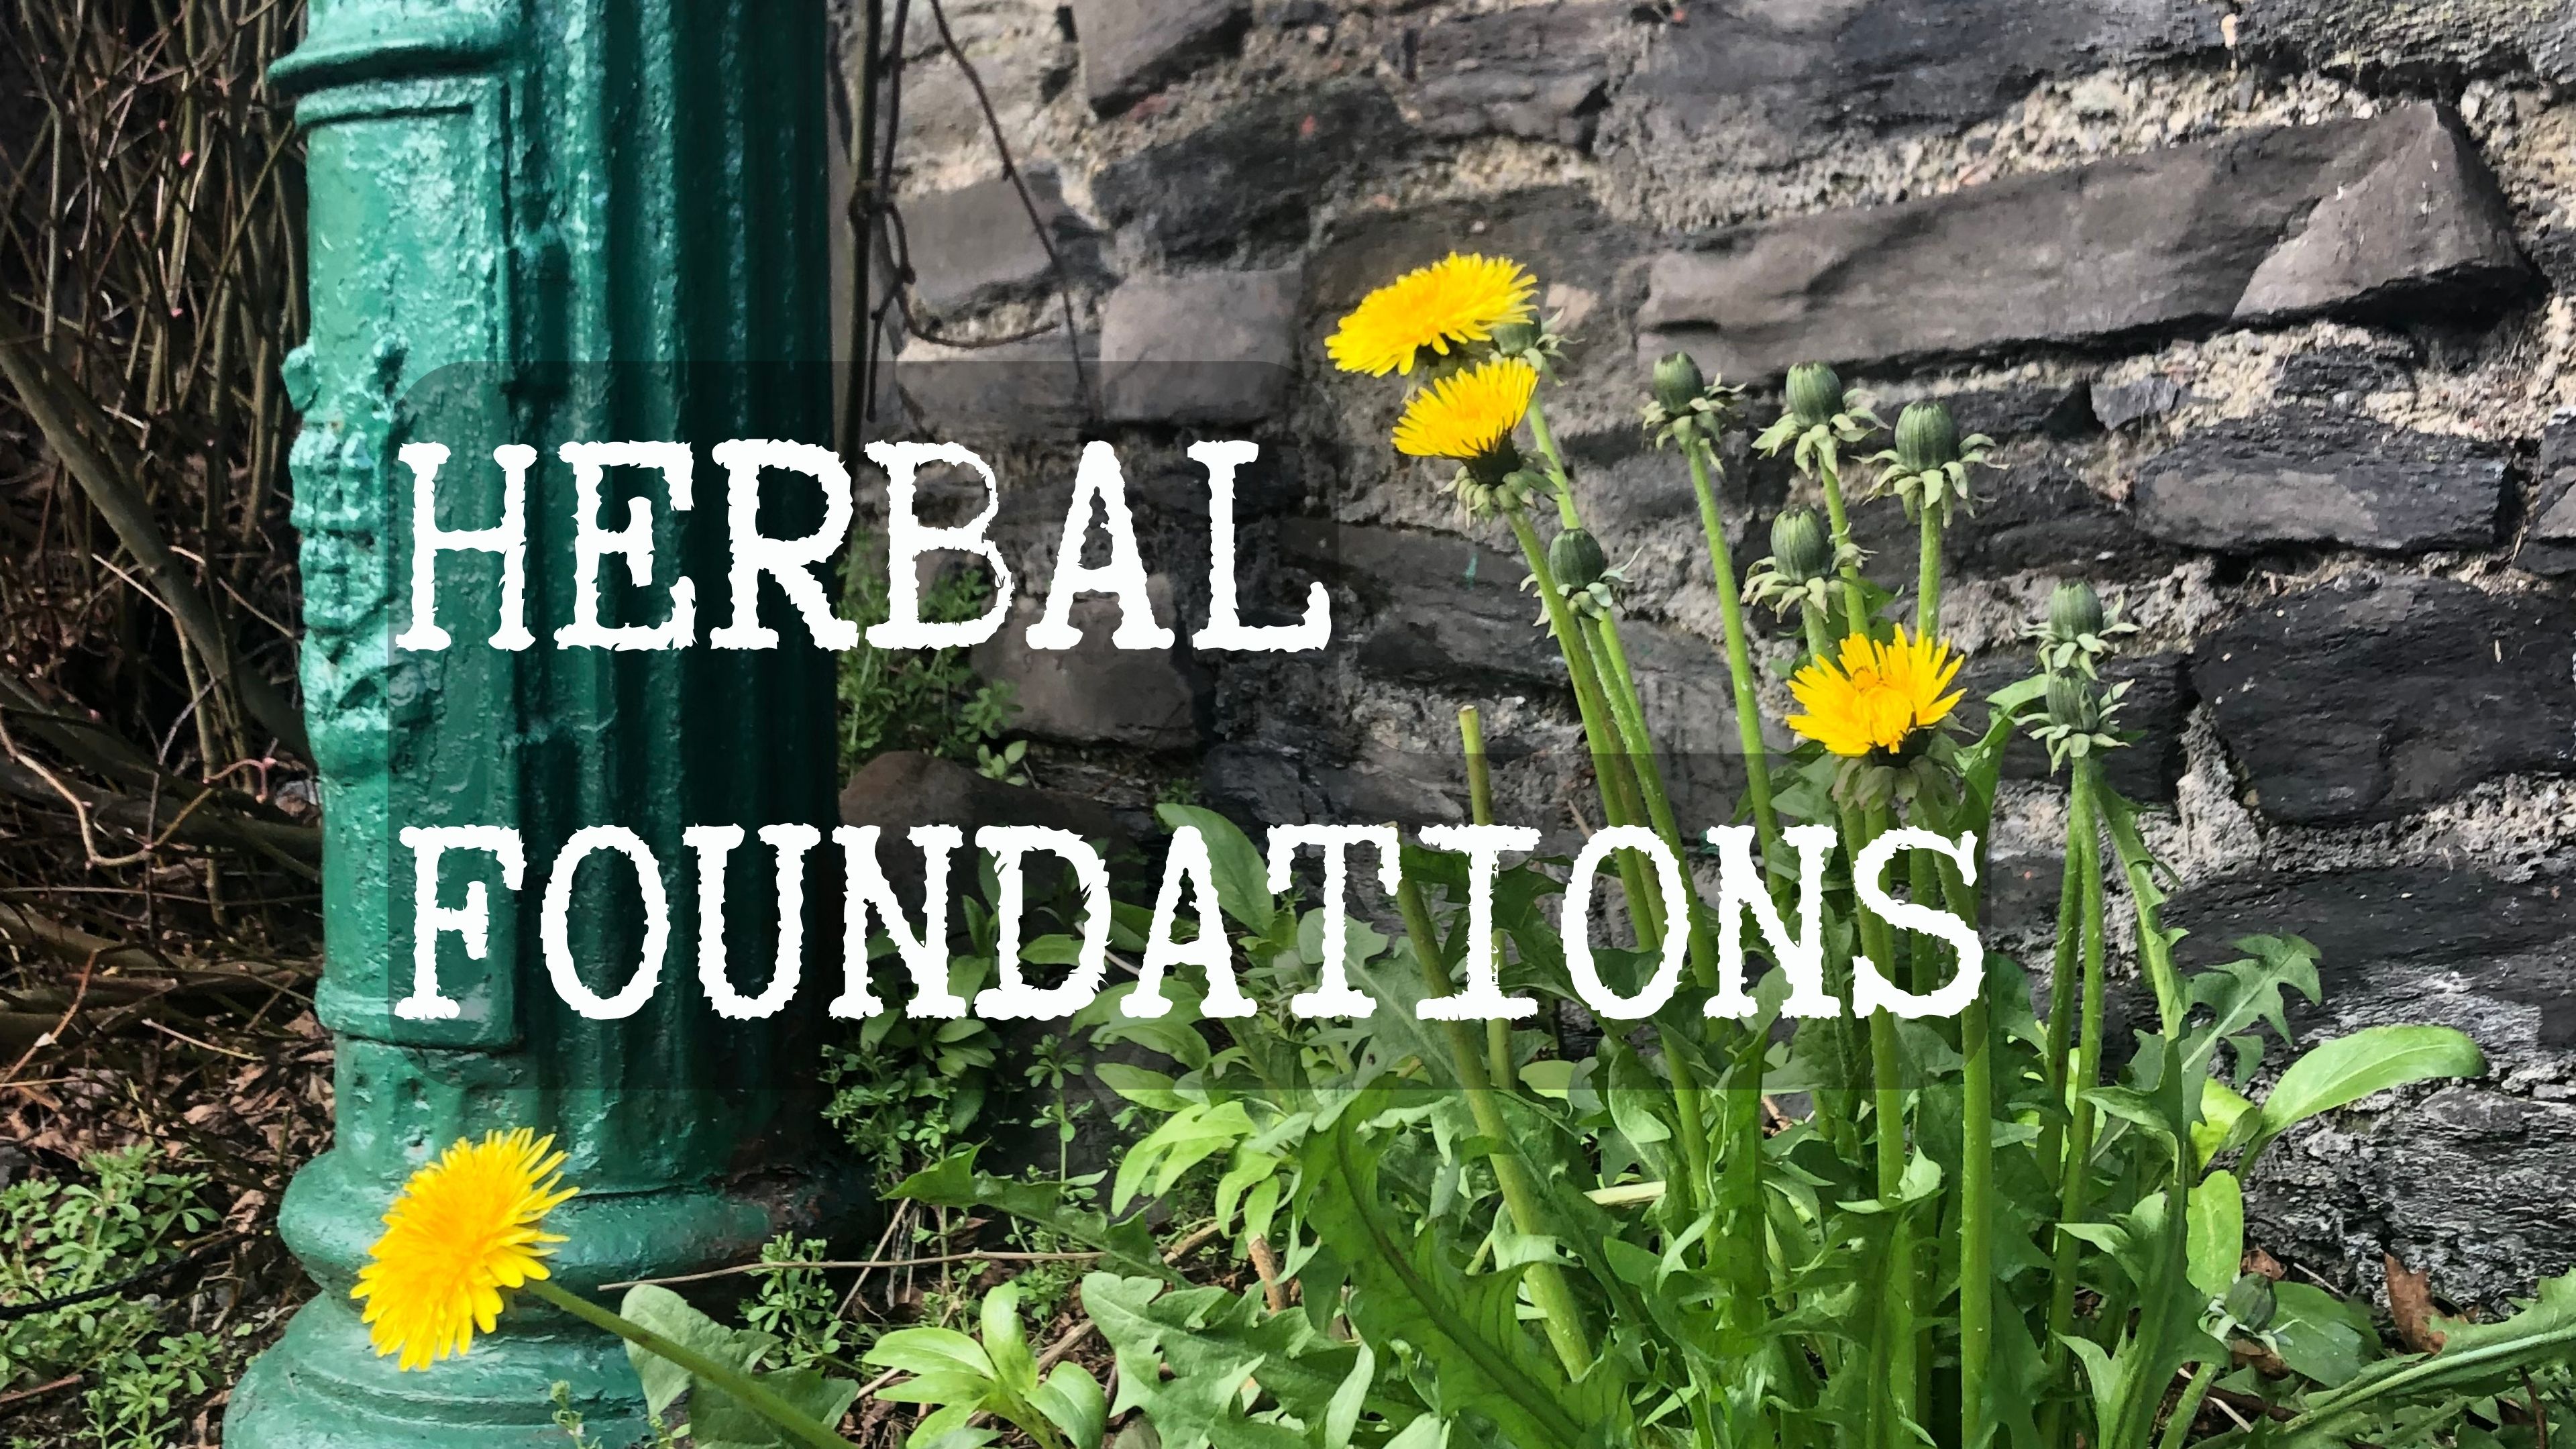 Herbal Foundations